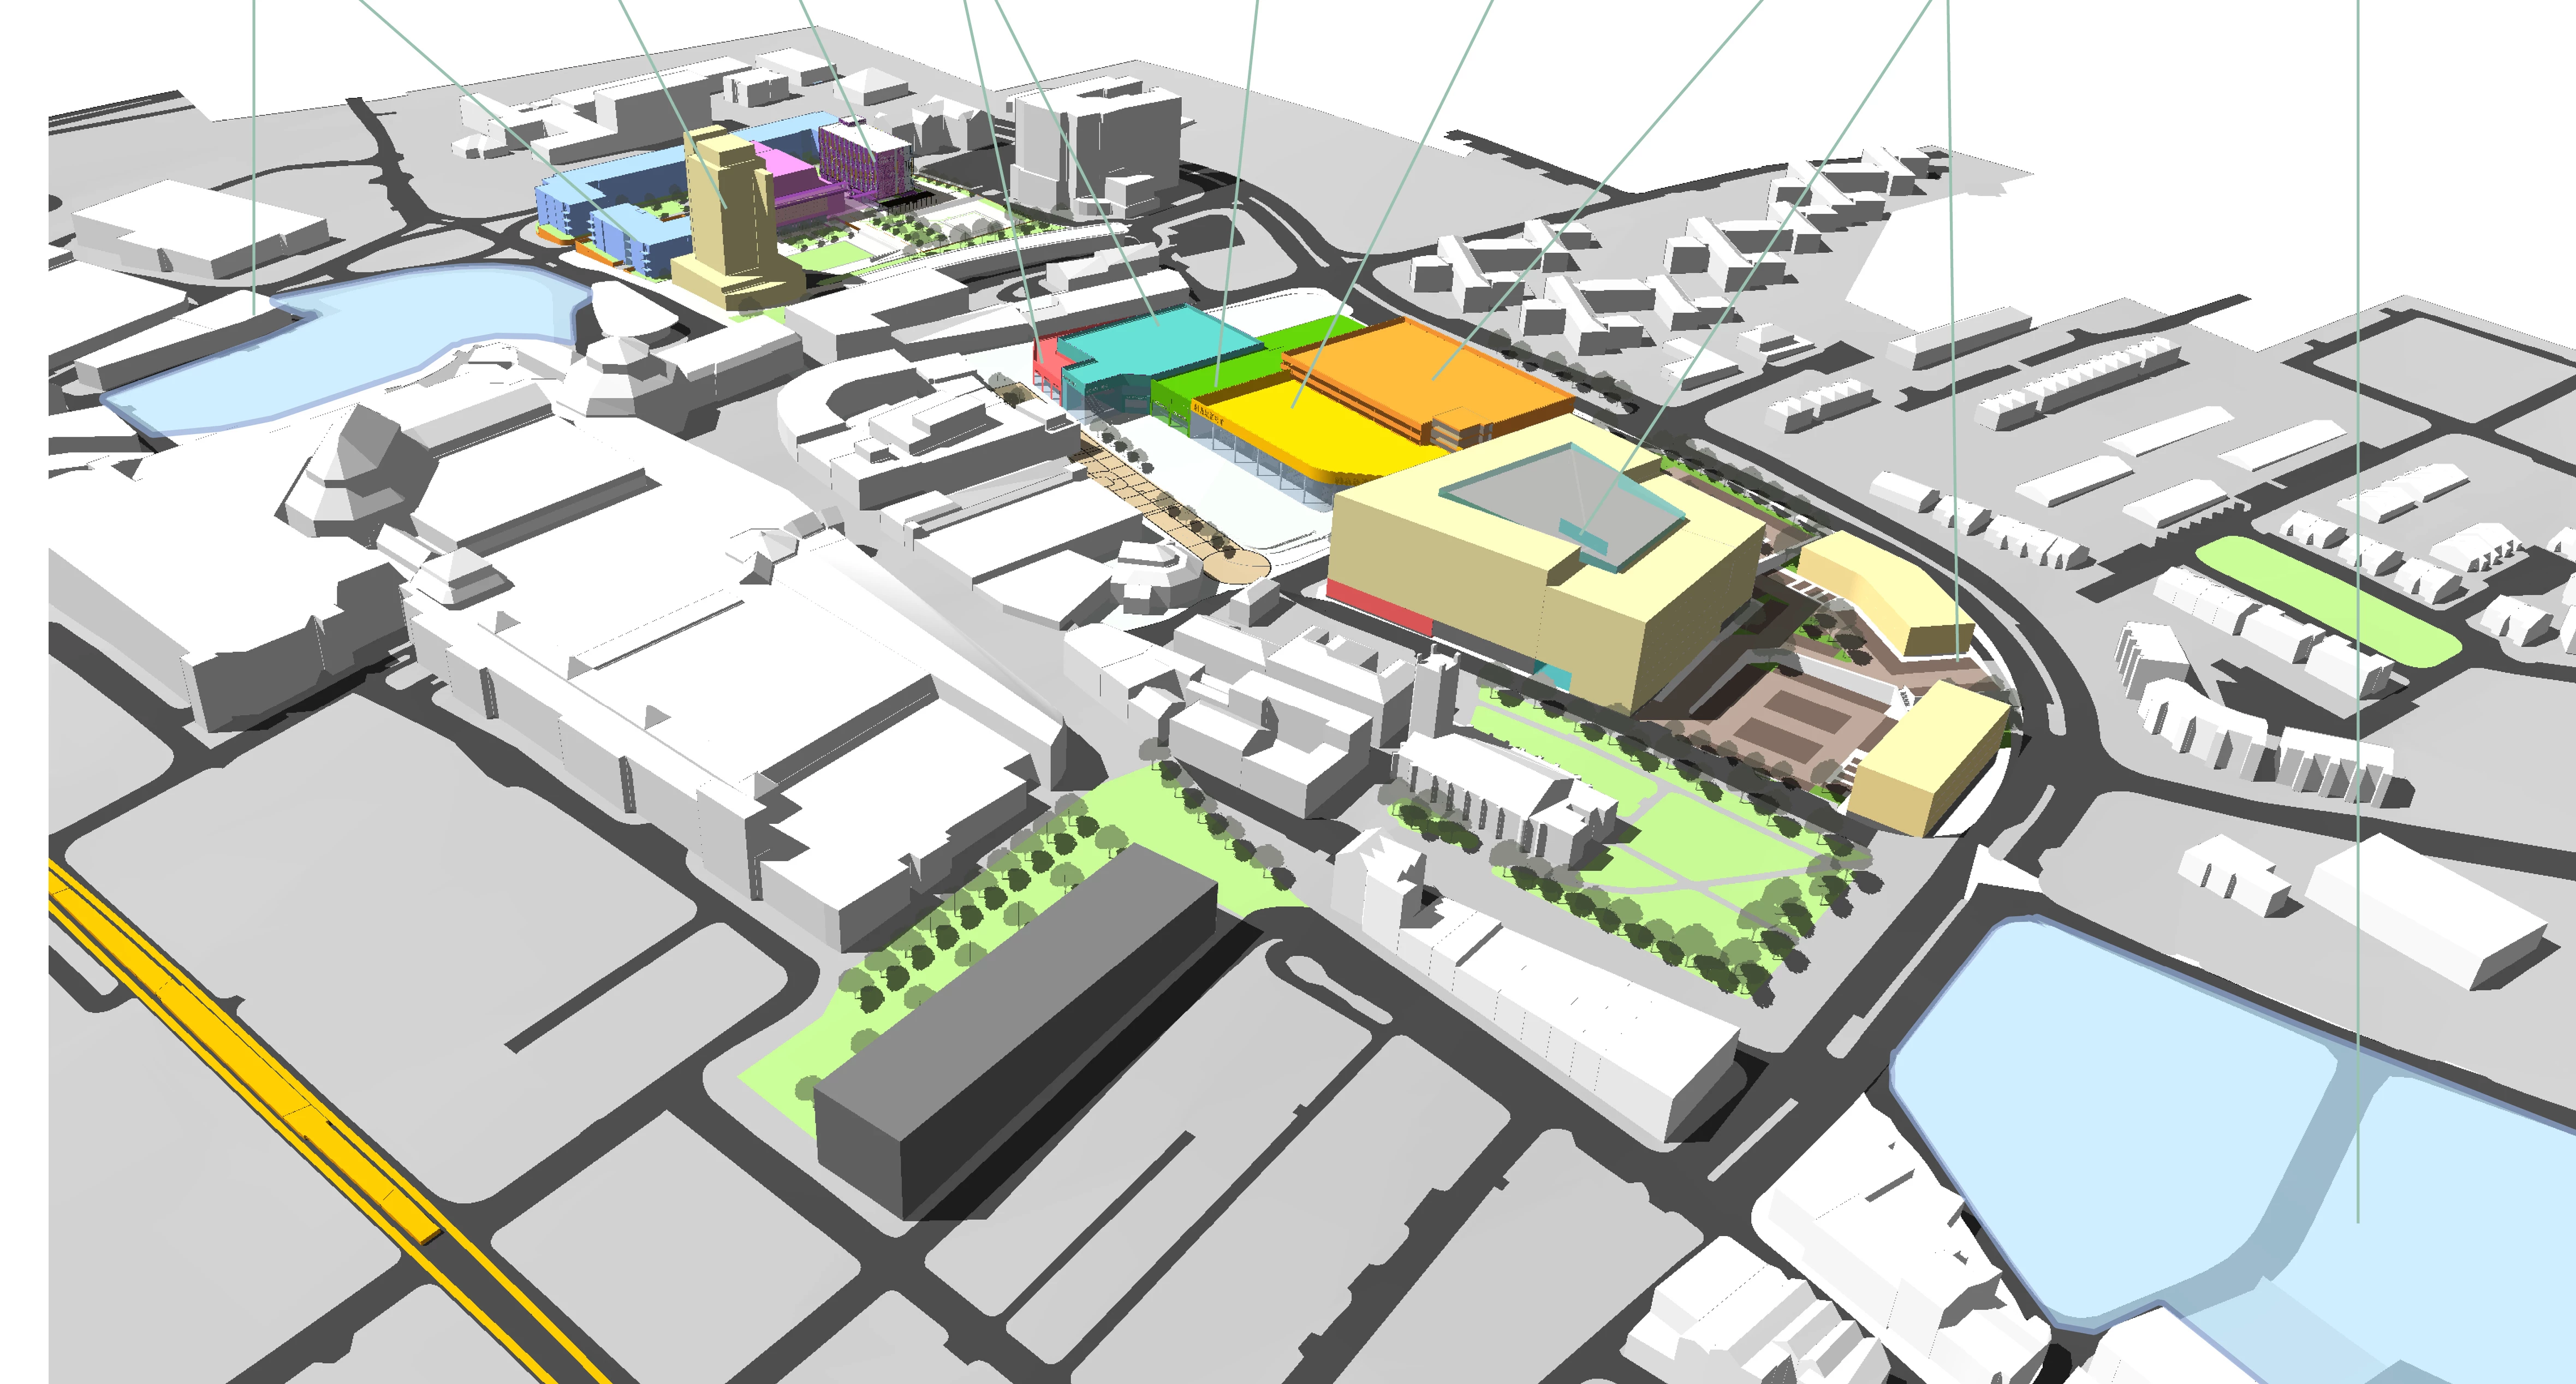 The redevelopment of Oldham is forecast to generate an additional £50m per annum for the town's economy